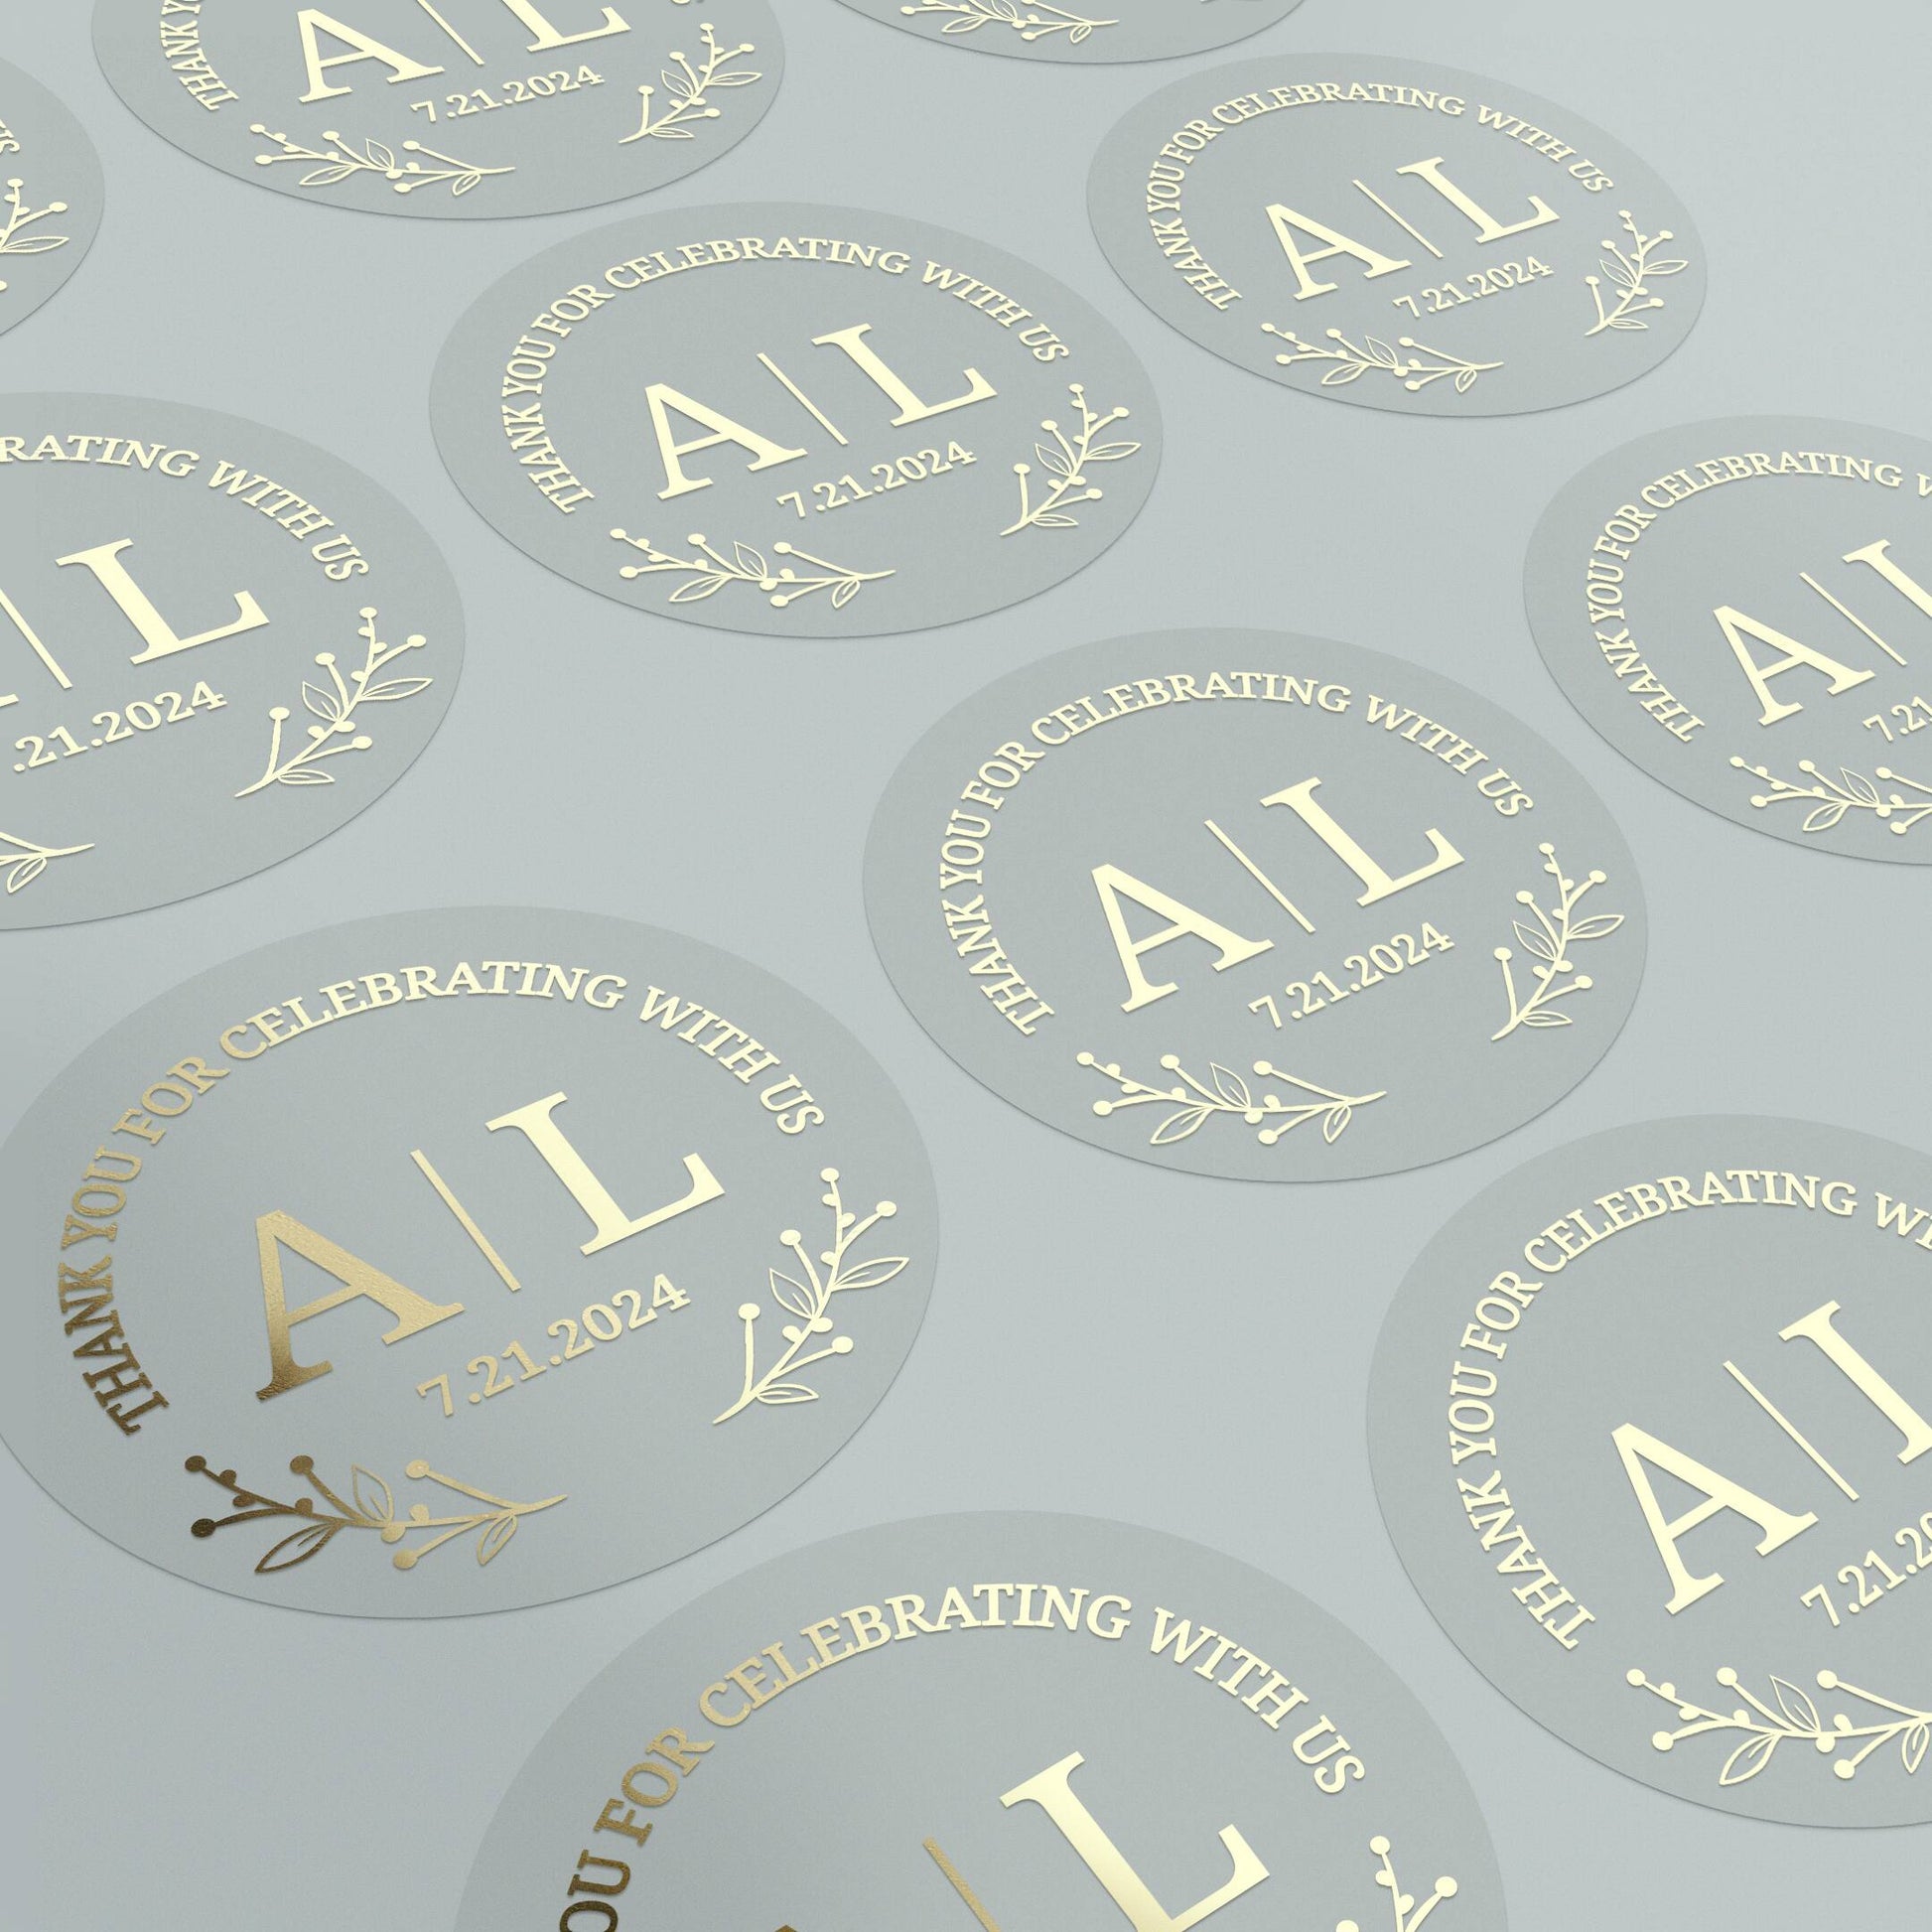 Thank You celebration sticker with gold initials and date with floral decorations. 